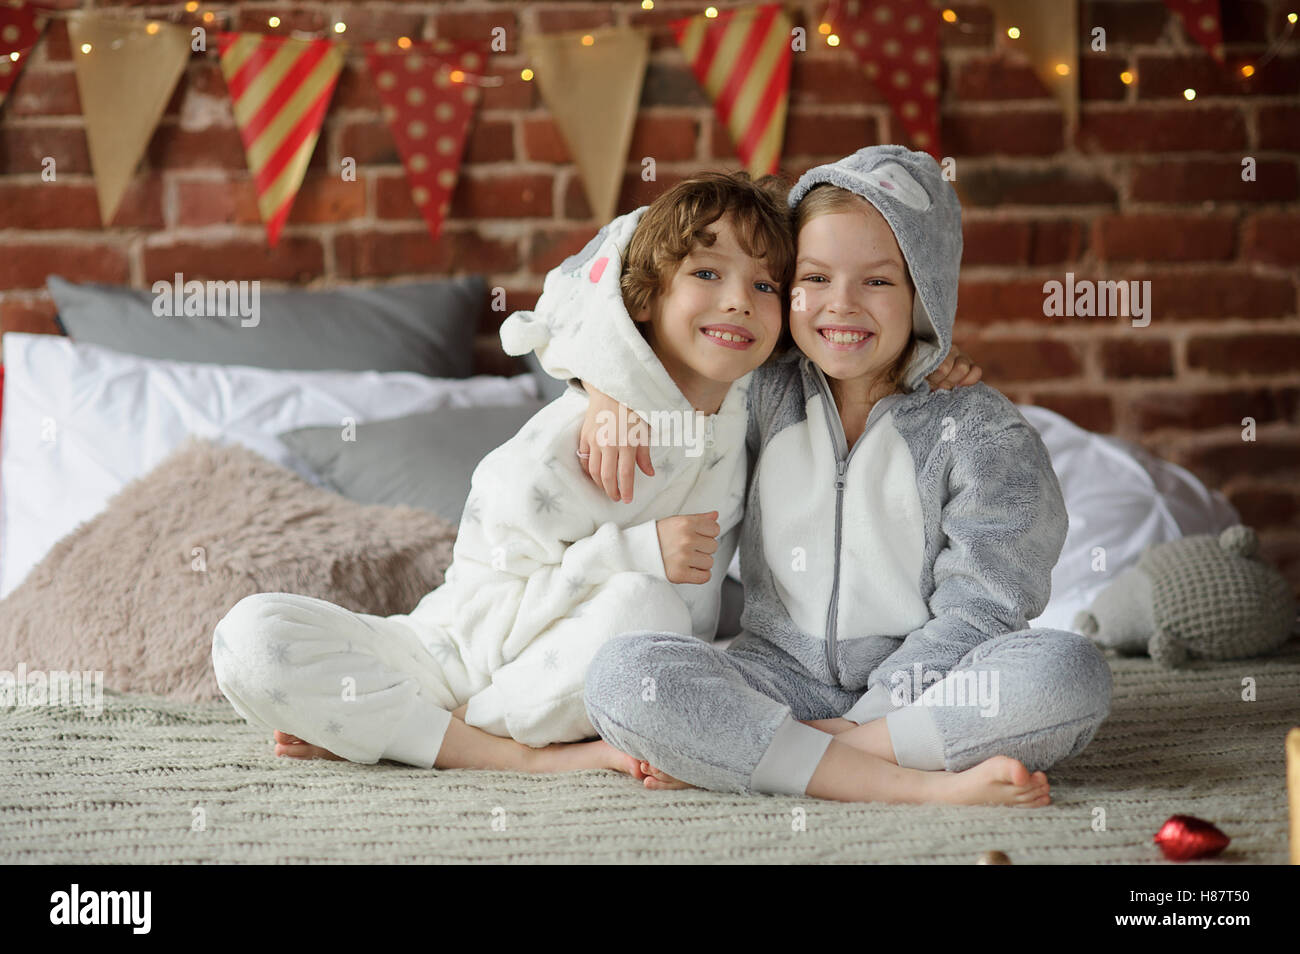 Christmas. Two children in pajamas sitting on the bed waiting for Christmas gifts. The bedroom is decorated with festive garland Stock Photo